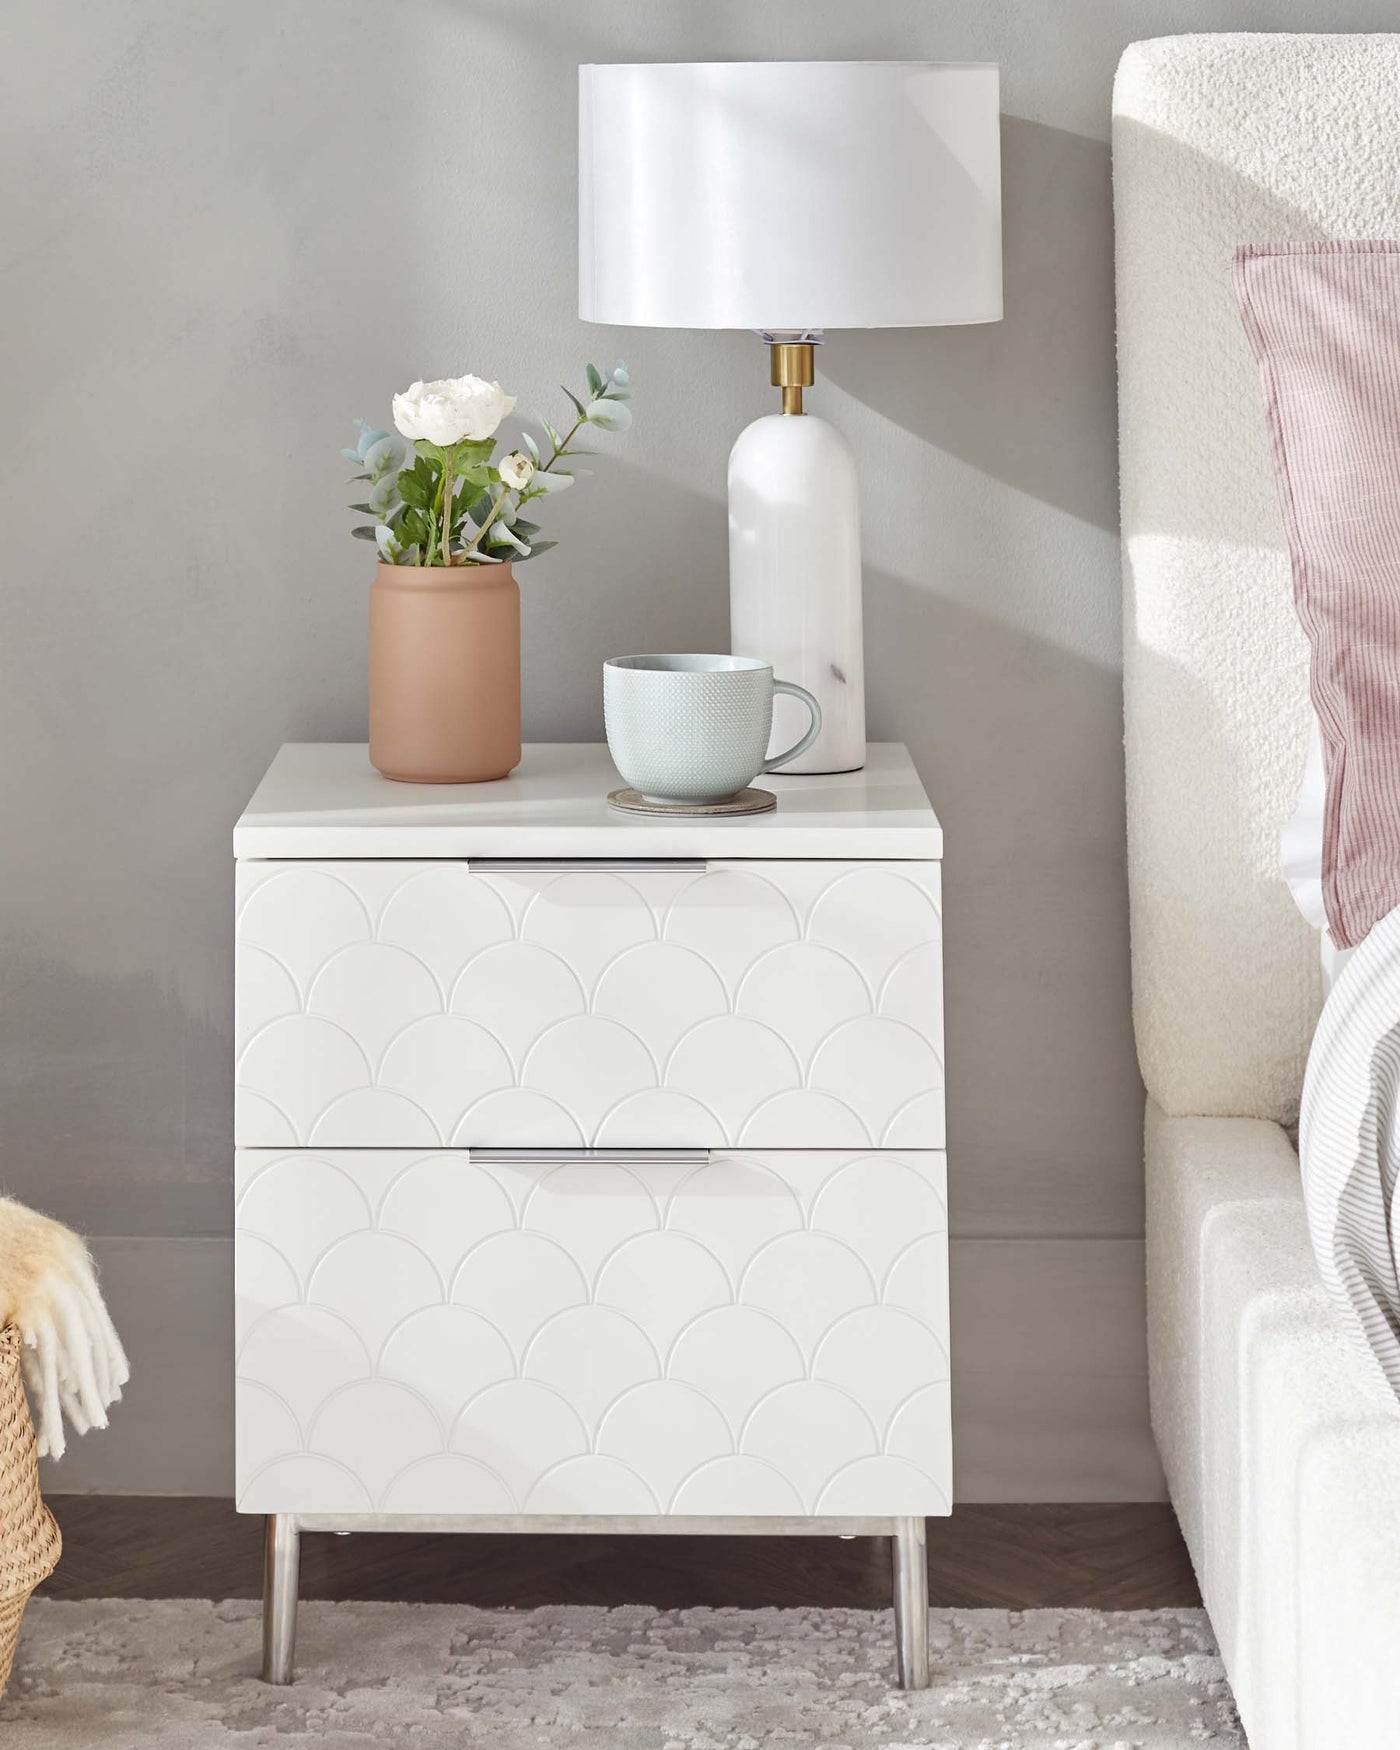 A modern white two-drawer nightstand with a scalloped pattern on the drawer fronts, resting on sleek metal legs. The nightstand is accessorised with a white cylindrical lamp with a large white shade, a terracotta vase with white flowers, and a pale blue mug on a coaster. The piece is positioned next to a light-coloured upholstered bed with a textured throw blanket, set against a light grey wall on a plush off-white carpet.